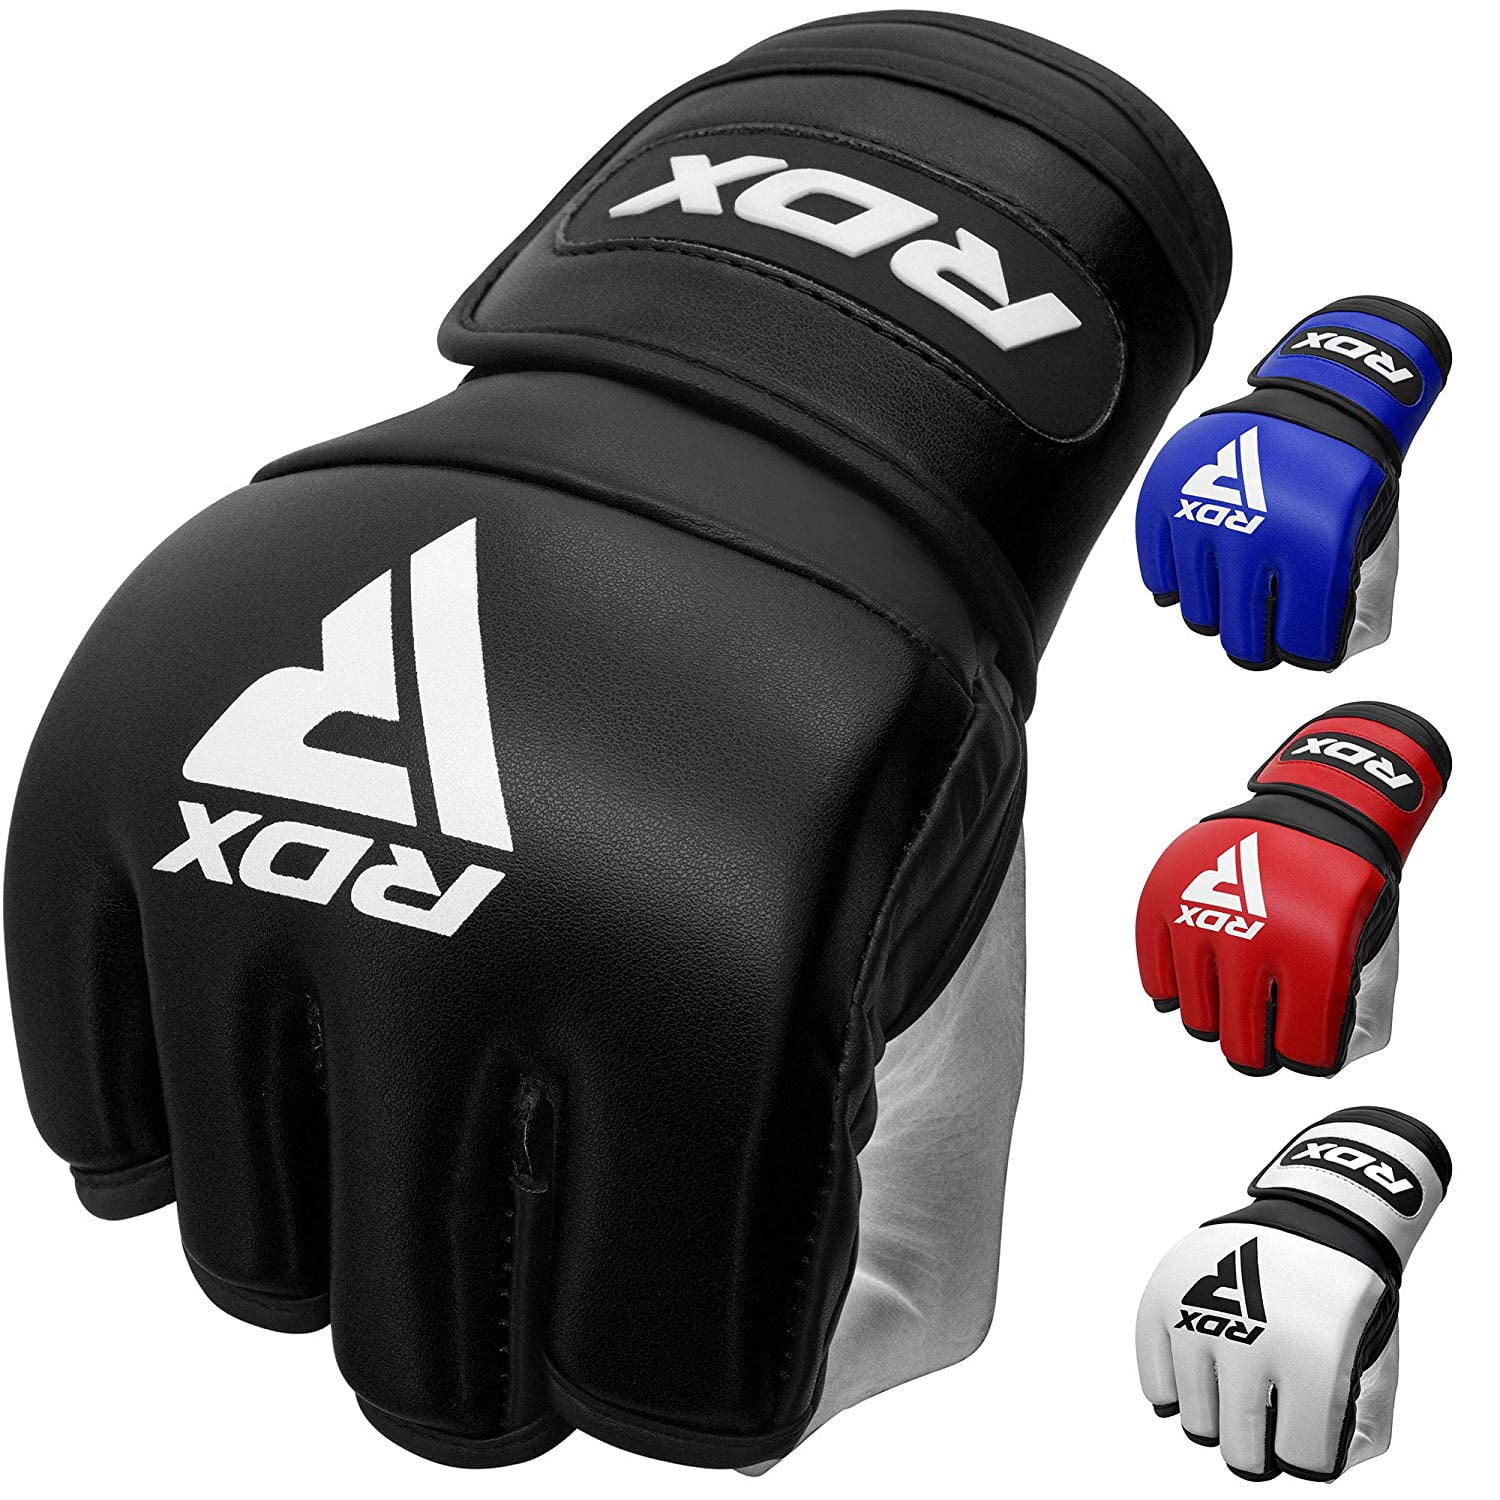 EMRAH Advanced Pro Grip Boxing Hand Wraps ESV-300 Knuckle Hand Wrist Protector Training Boxing gel Inner Gloves Fist Gel Wraps Bandages Mitts 